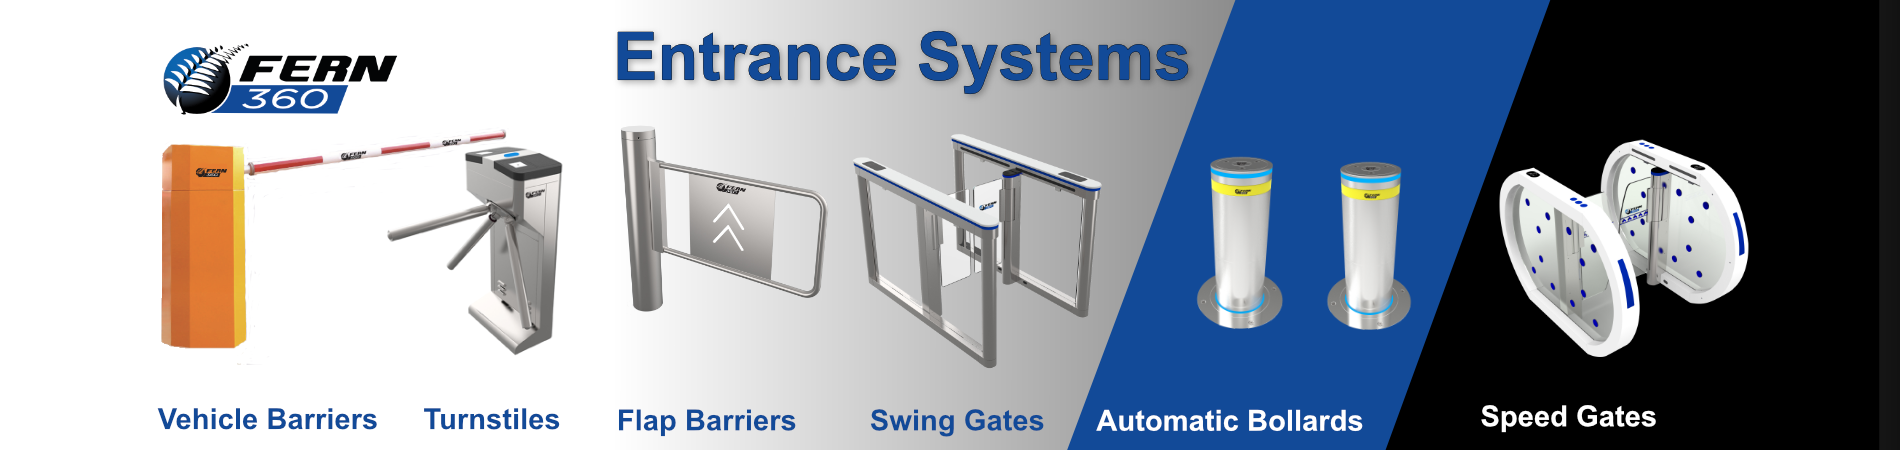 Fern360 entrance systems and solutions security entrance control banner cce1e437 3c51 4c54 84b1 b208ff42da0b